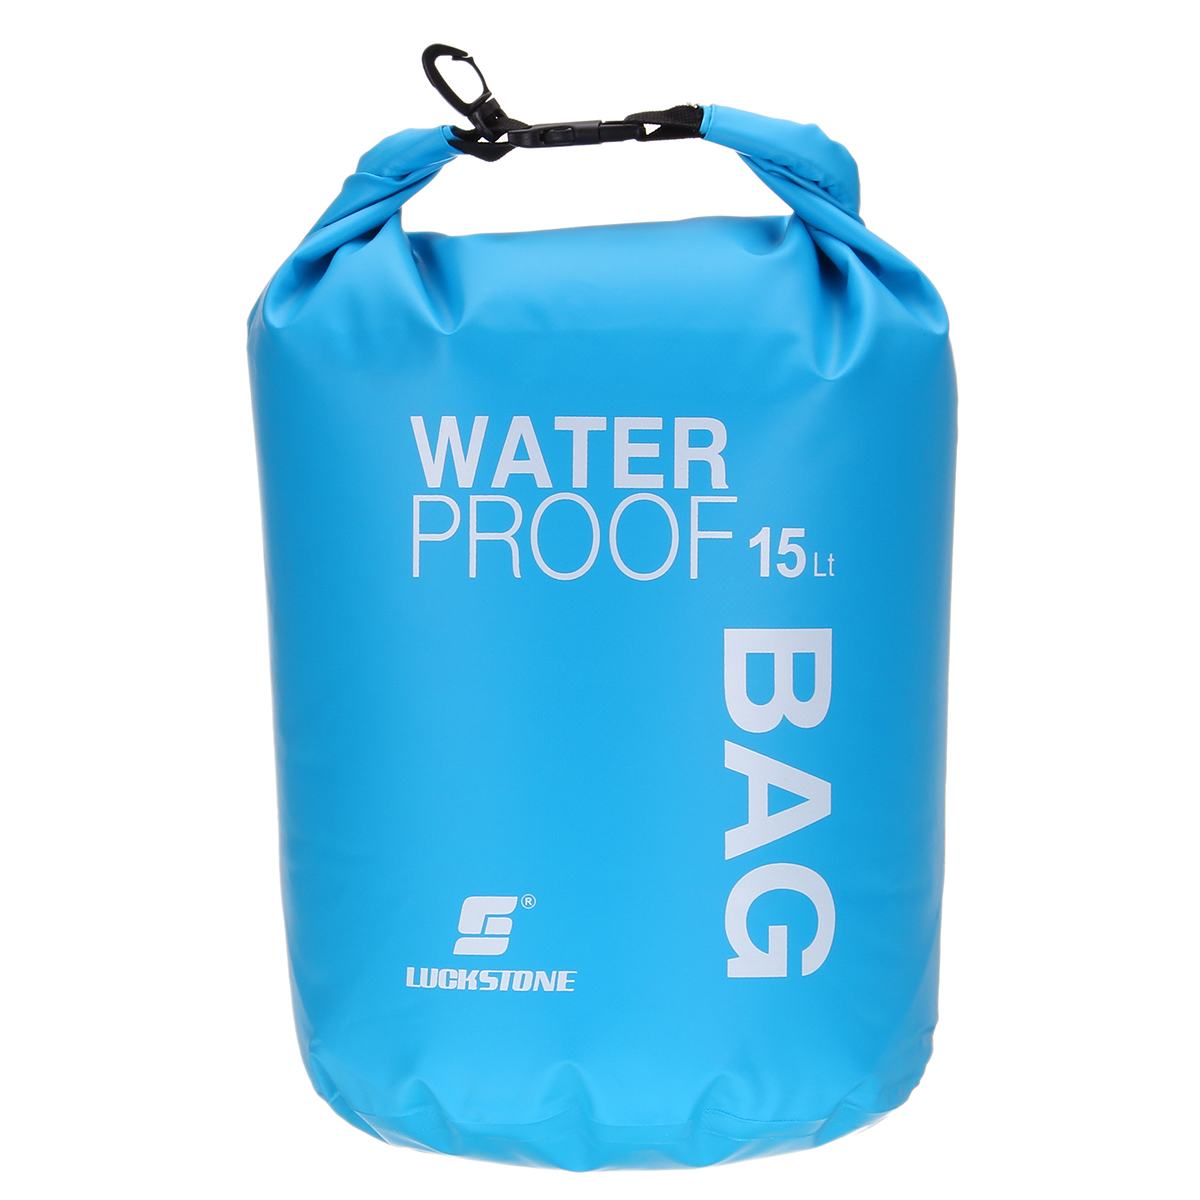 15L-Outdoor-Swimming-Air-Inflation-Floating-Mobile-Phone-Camera-Storage-PVC-Waterproof-Bag-1820816-10